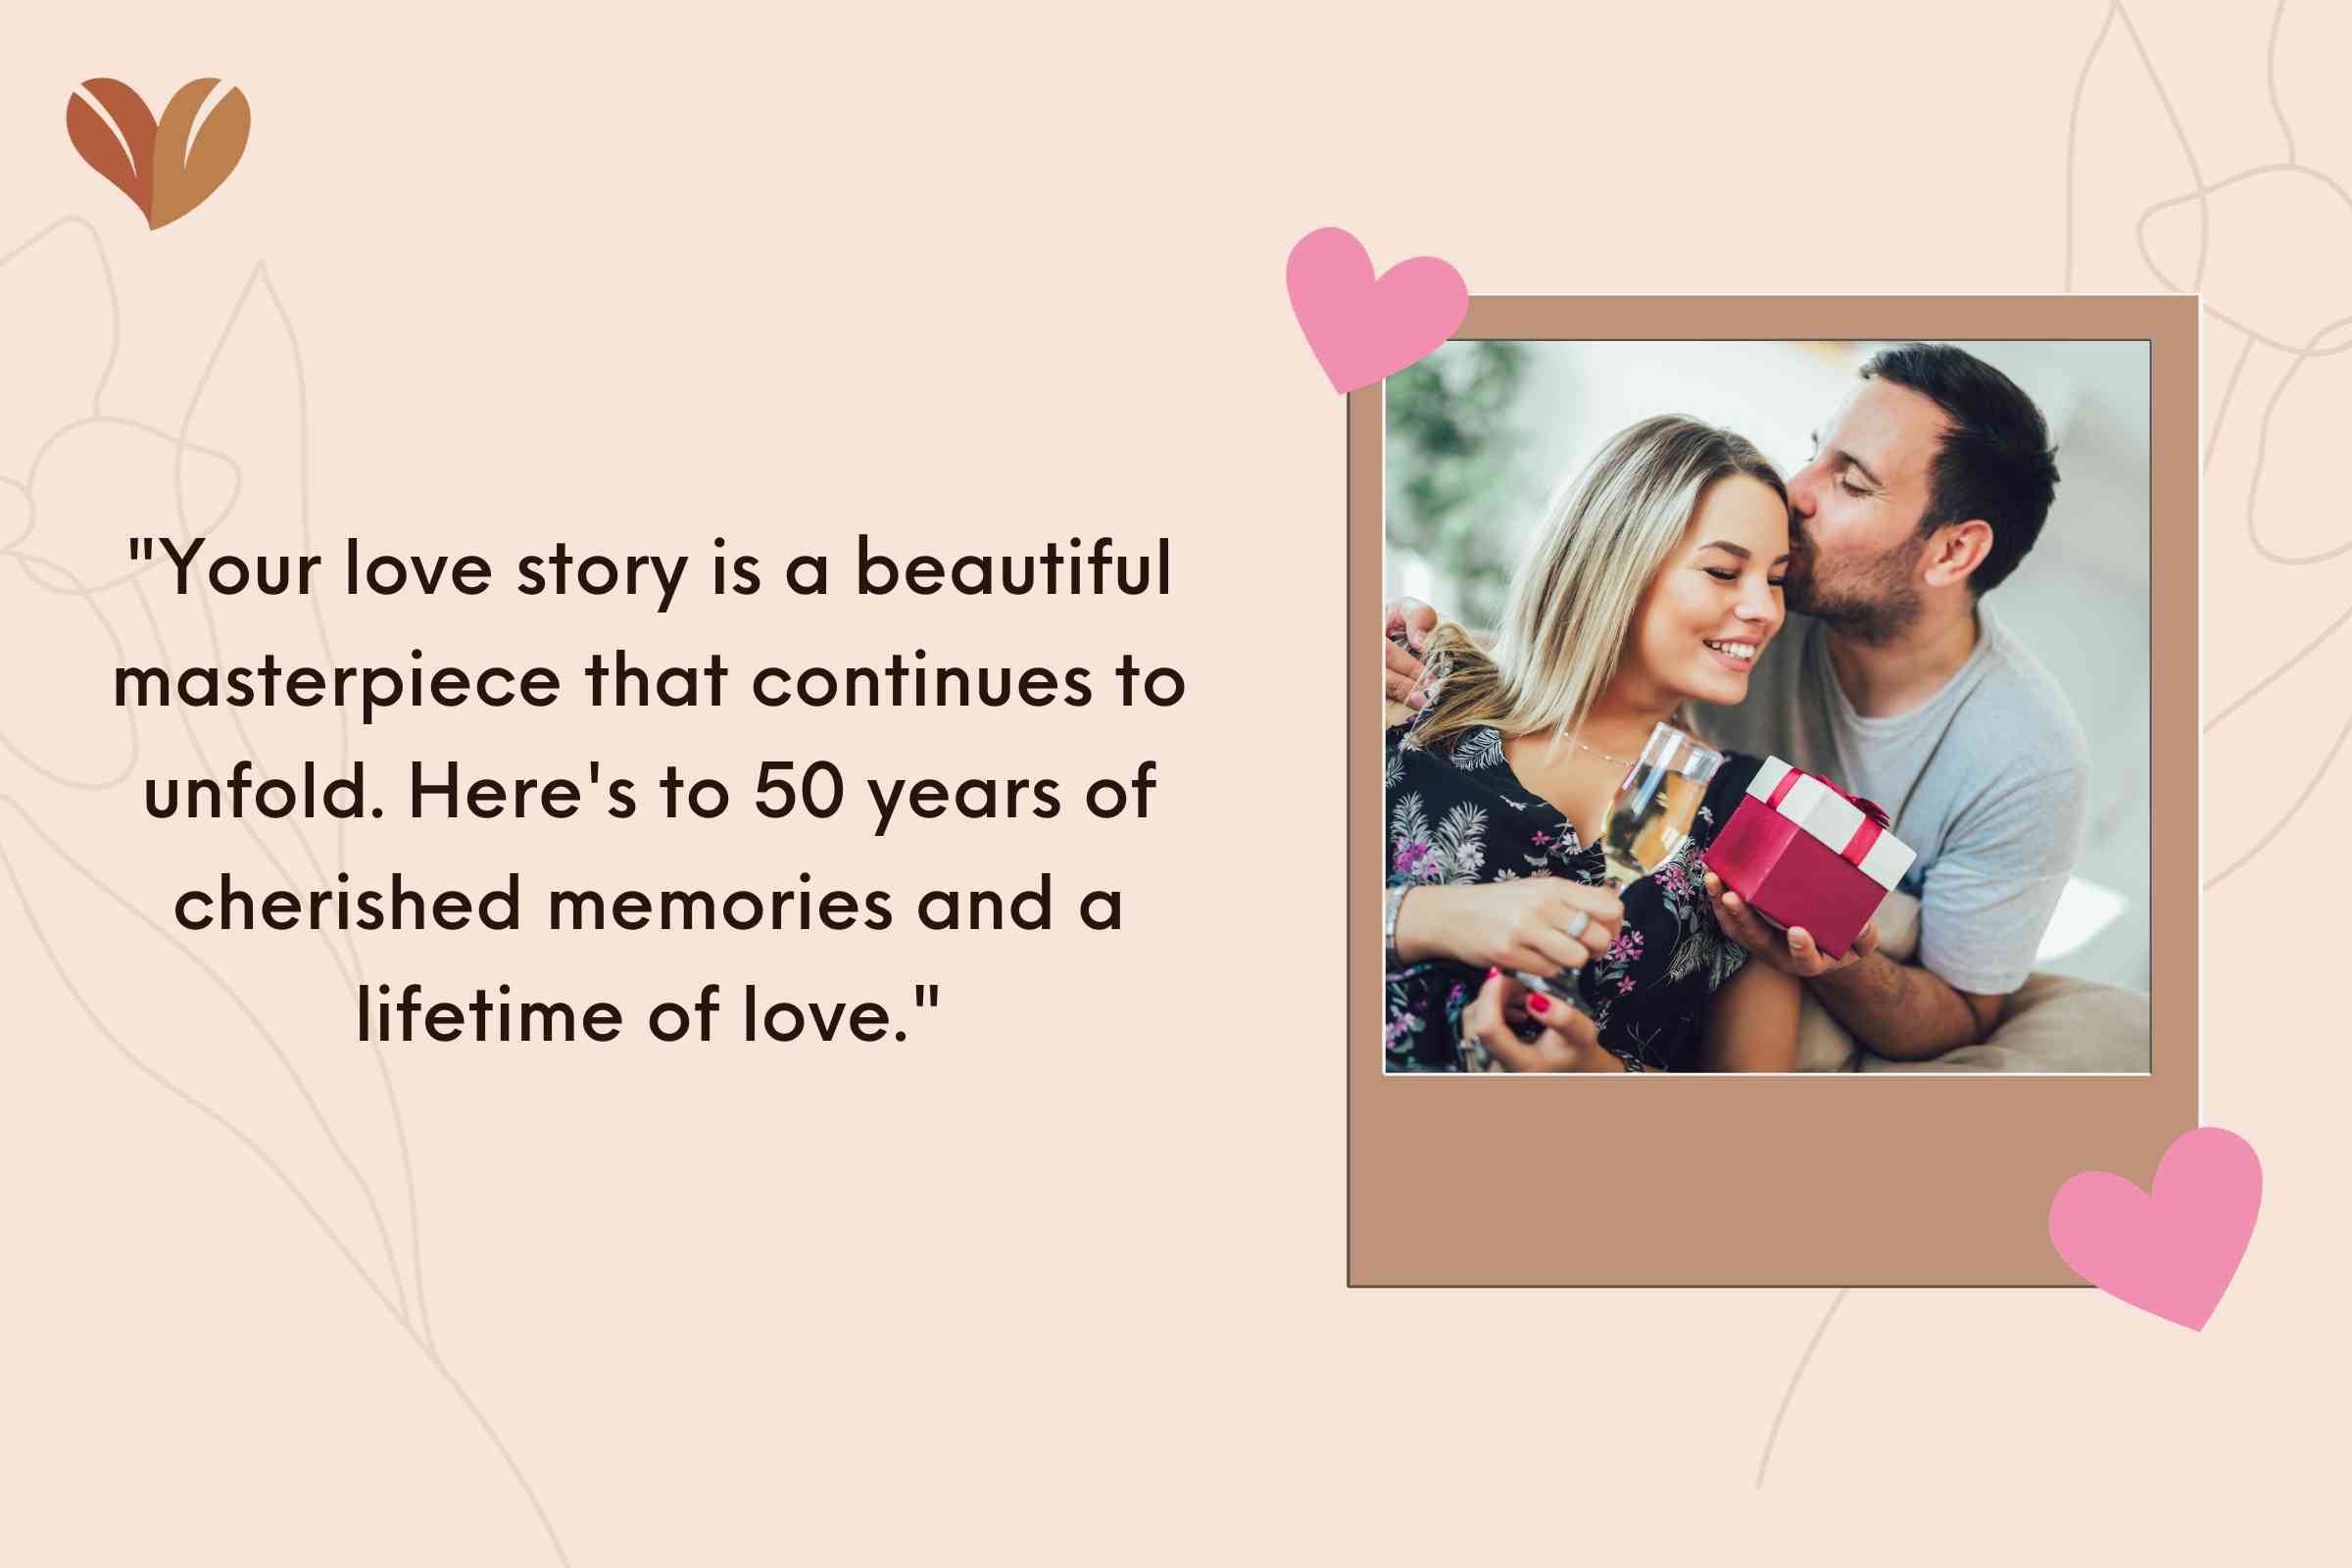 Your love story is a beautiful masterpiece that continues to unfold. Here's to 50 years of cherished memories and a lifetime of love.